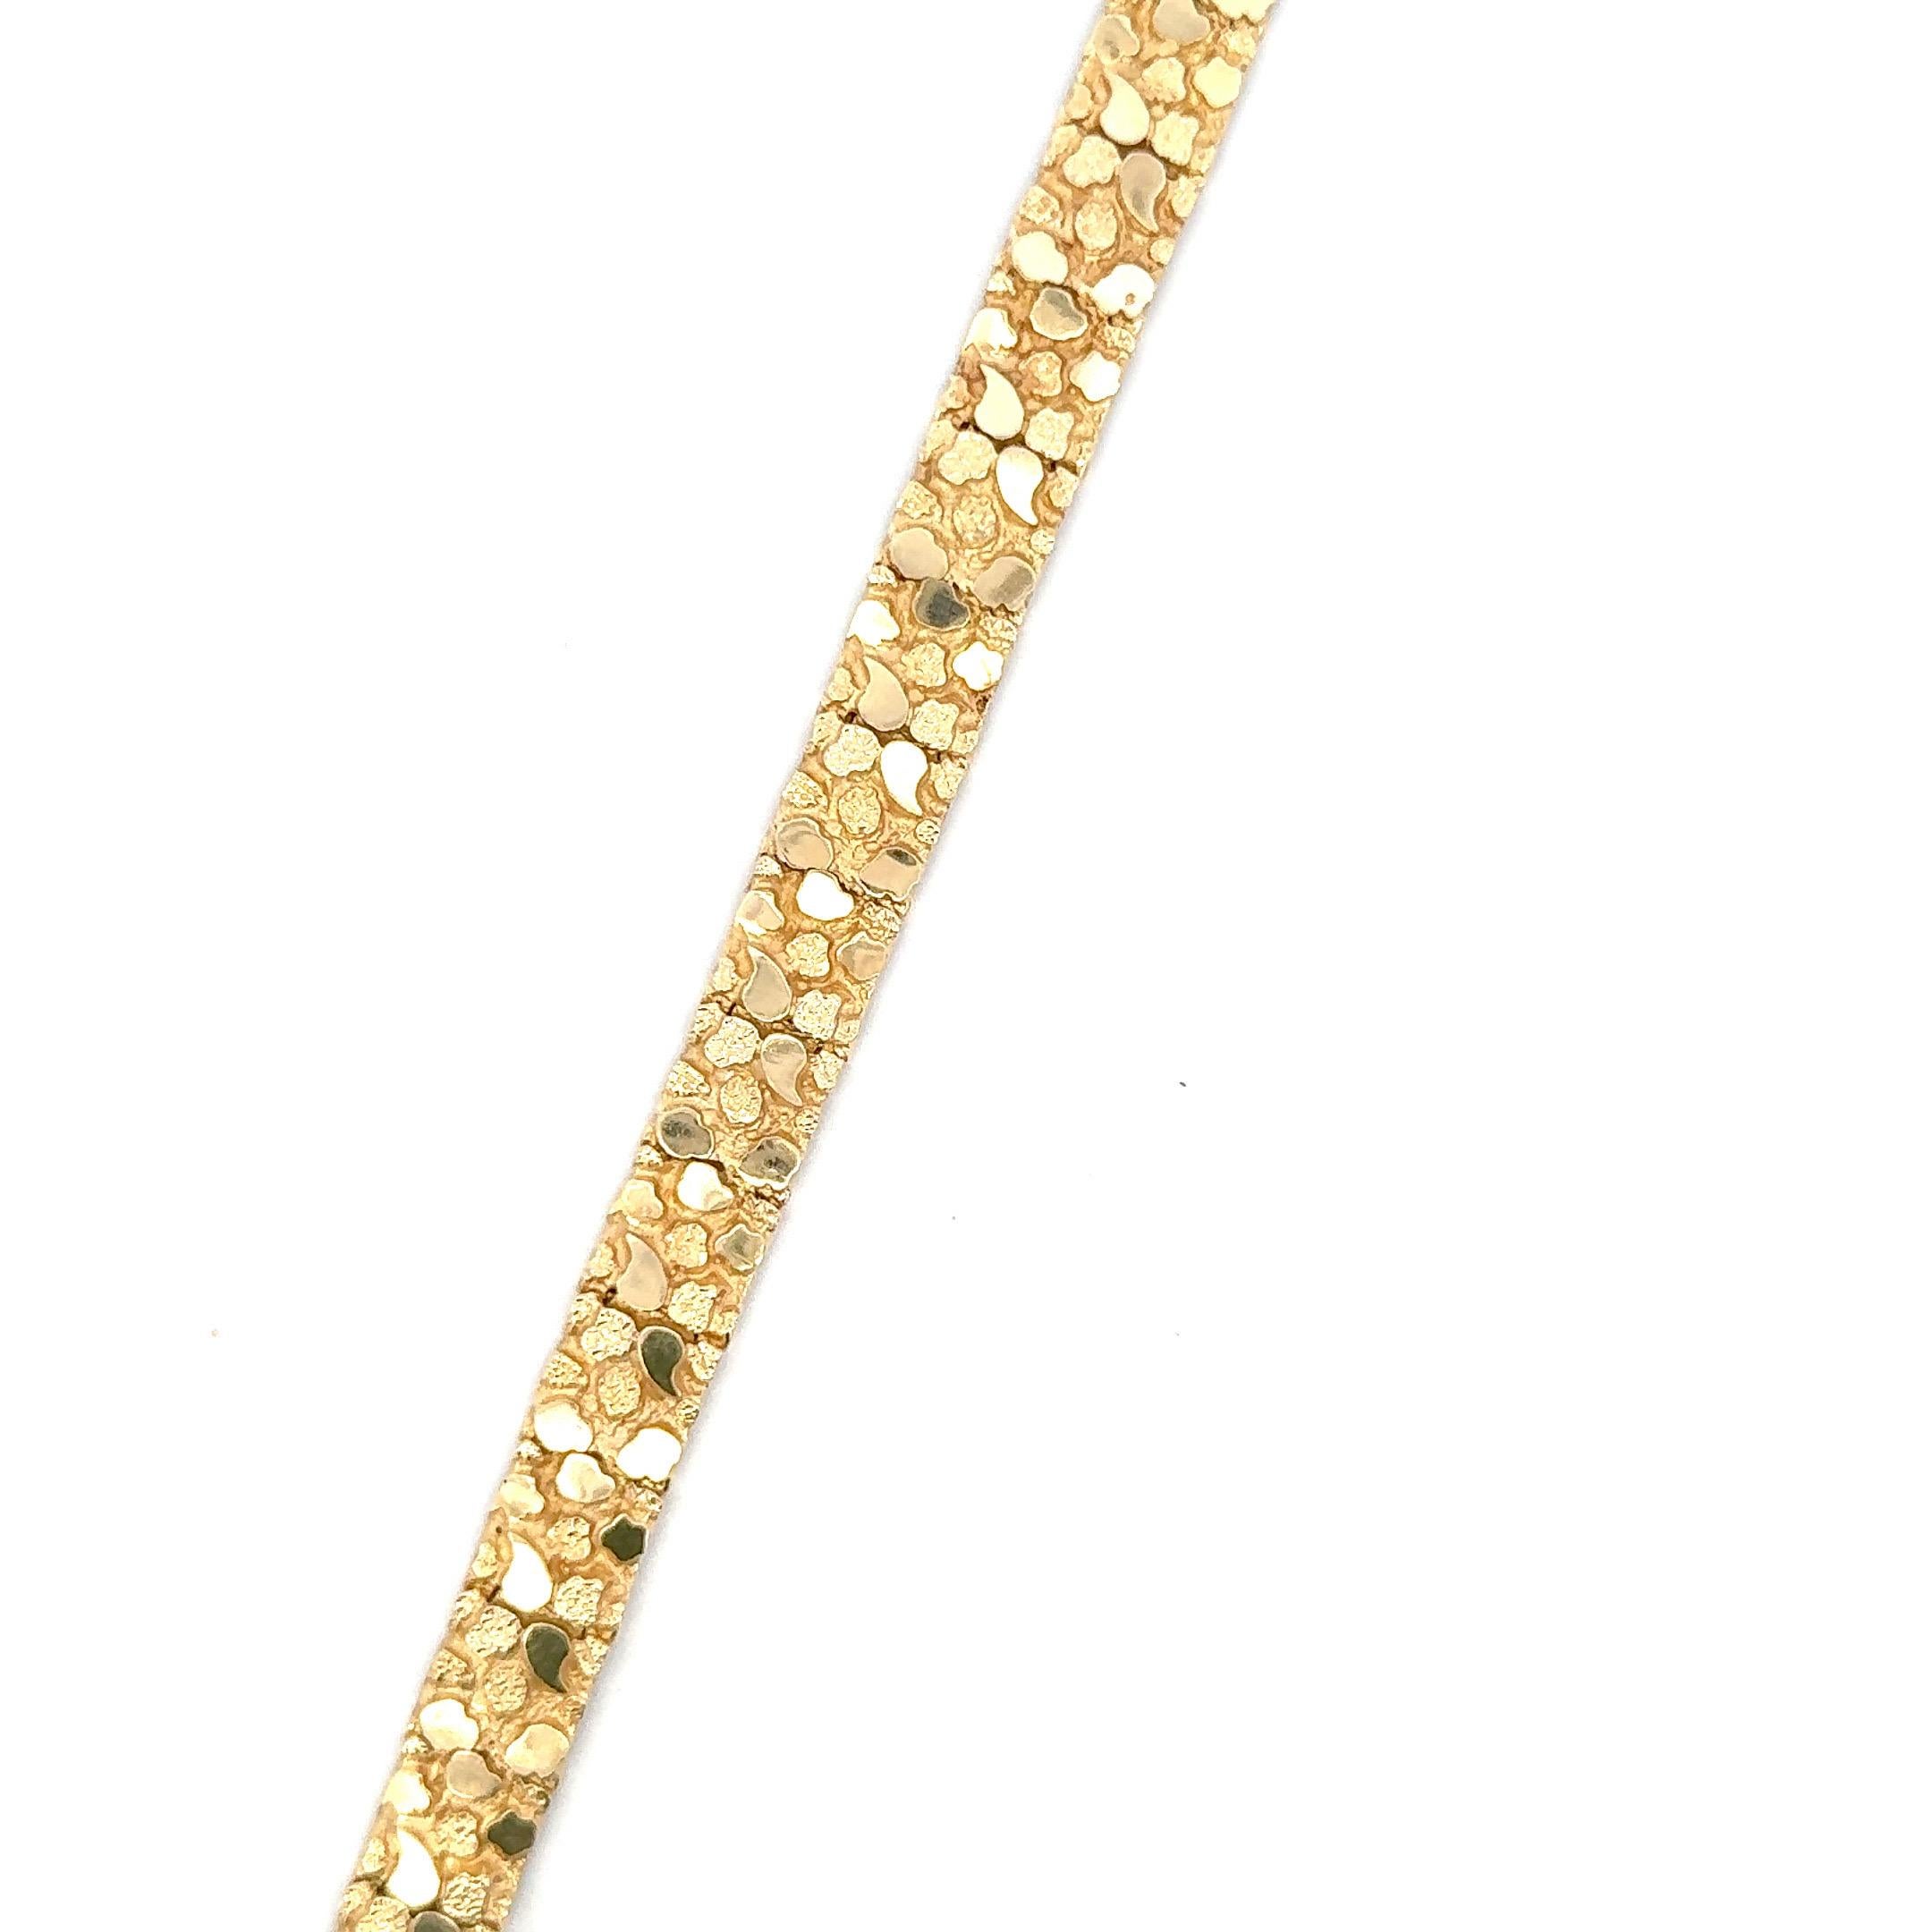 Contemporary Textured & High Polished Stone Motif Bracelet 27.4 Grams 14 Karat Yellow Gold  For Sale